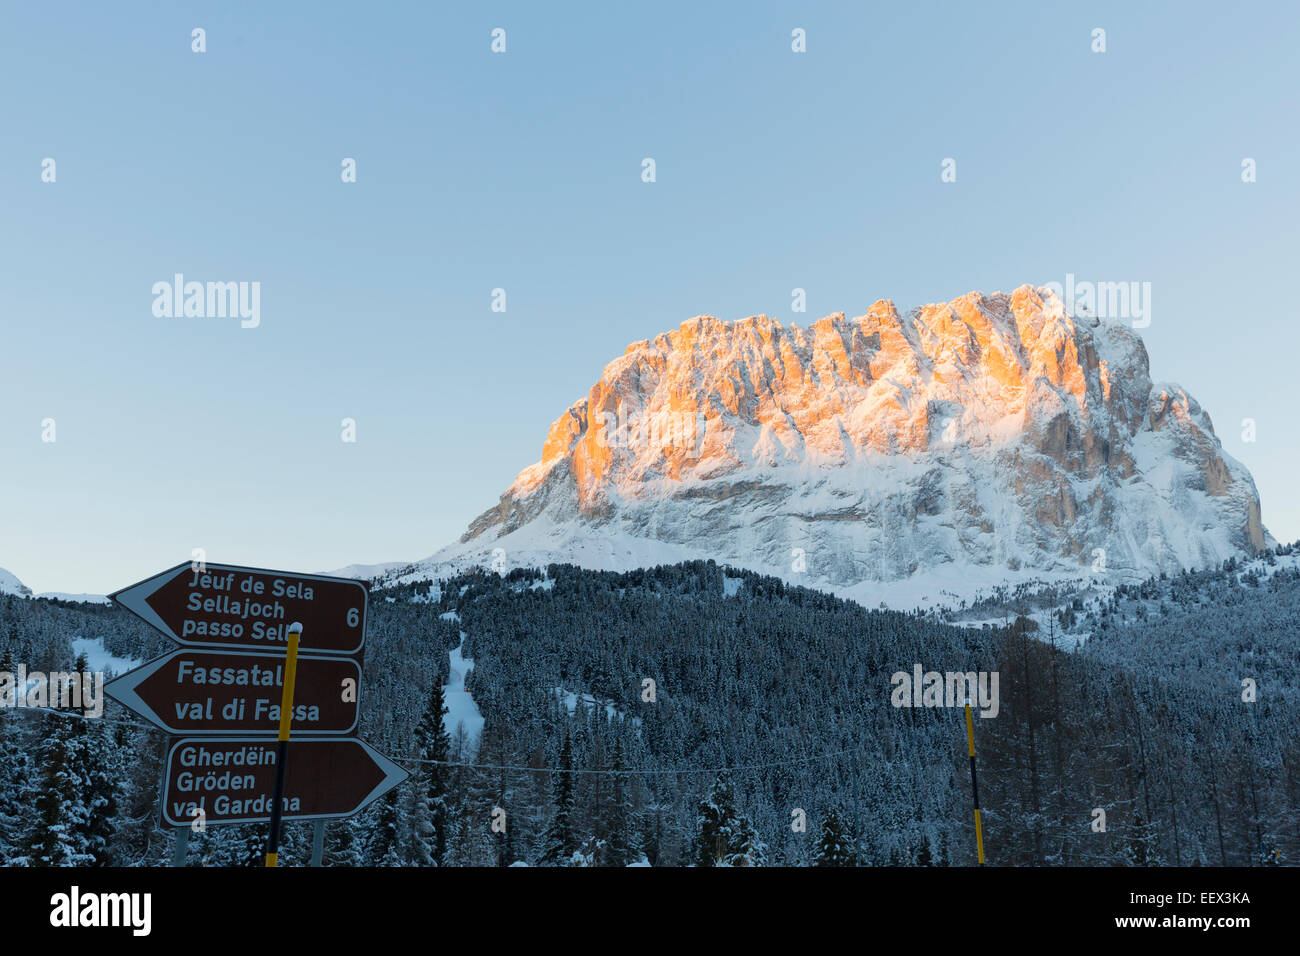 Face of mount Langkofel (Sassolungo) from Gardena mountain pass in the Dolomites of South Tyrol, Italy. Stock Photo